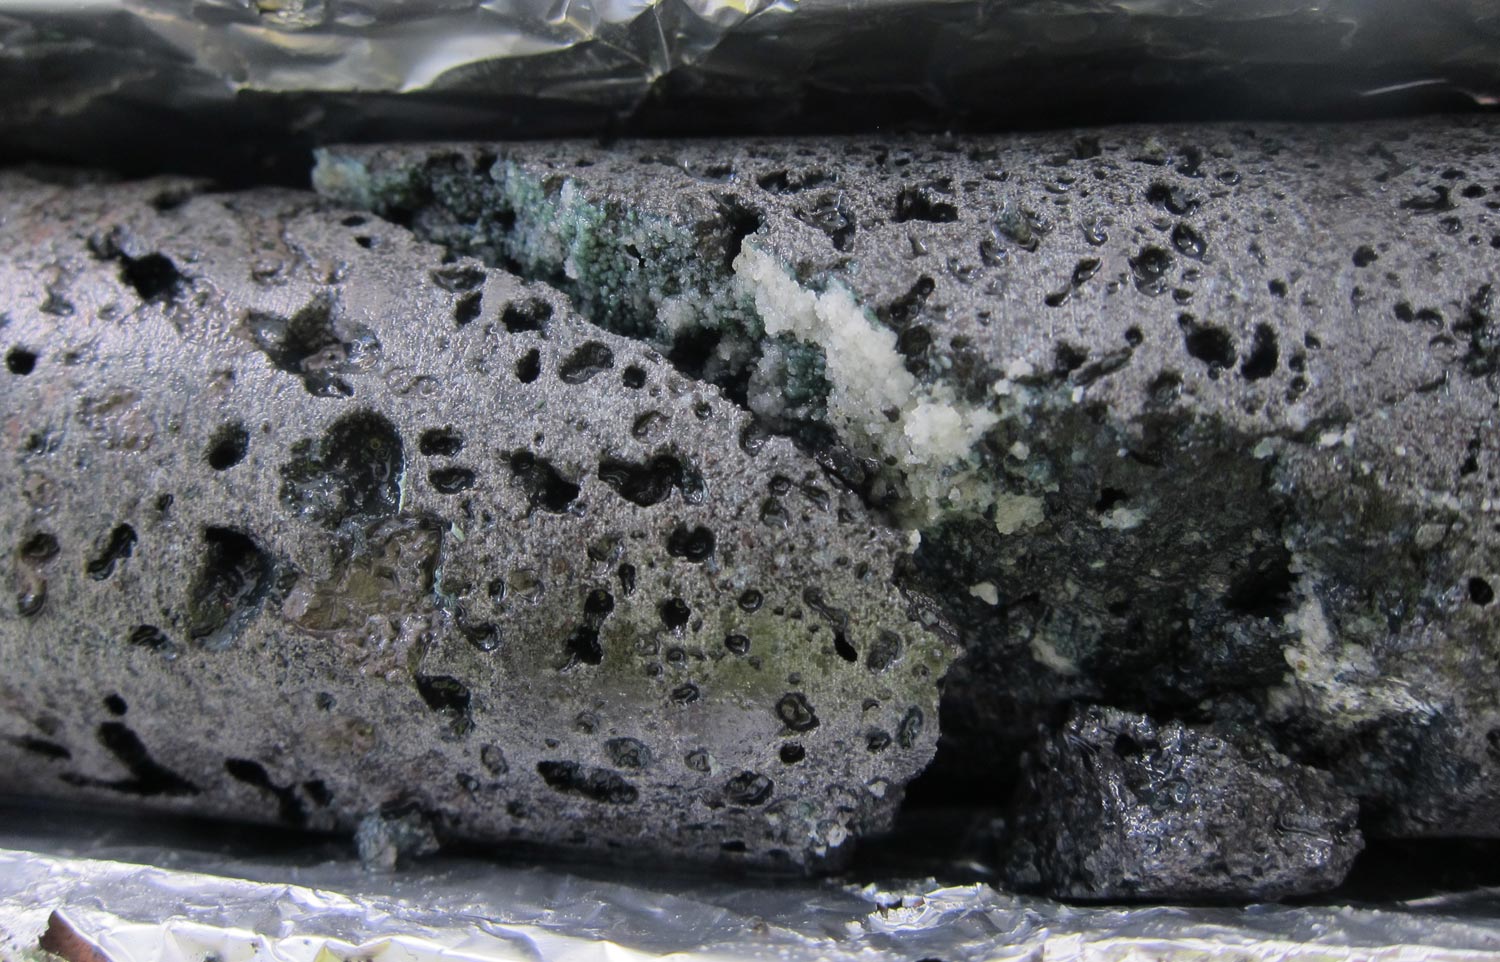 The CarbFix2 project in Iceland injects CO2 in liquid form, rather than as a gas, into porous basaltic rock underground. The CO2 reacts with the rock to form less harmful calcite. Image credit: Sandra O. Snaebjornsdottir, CarbFix